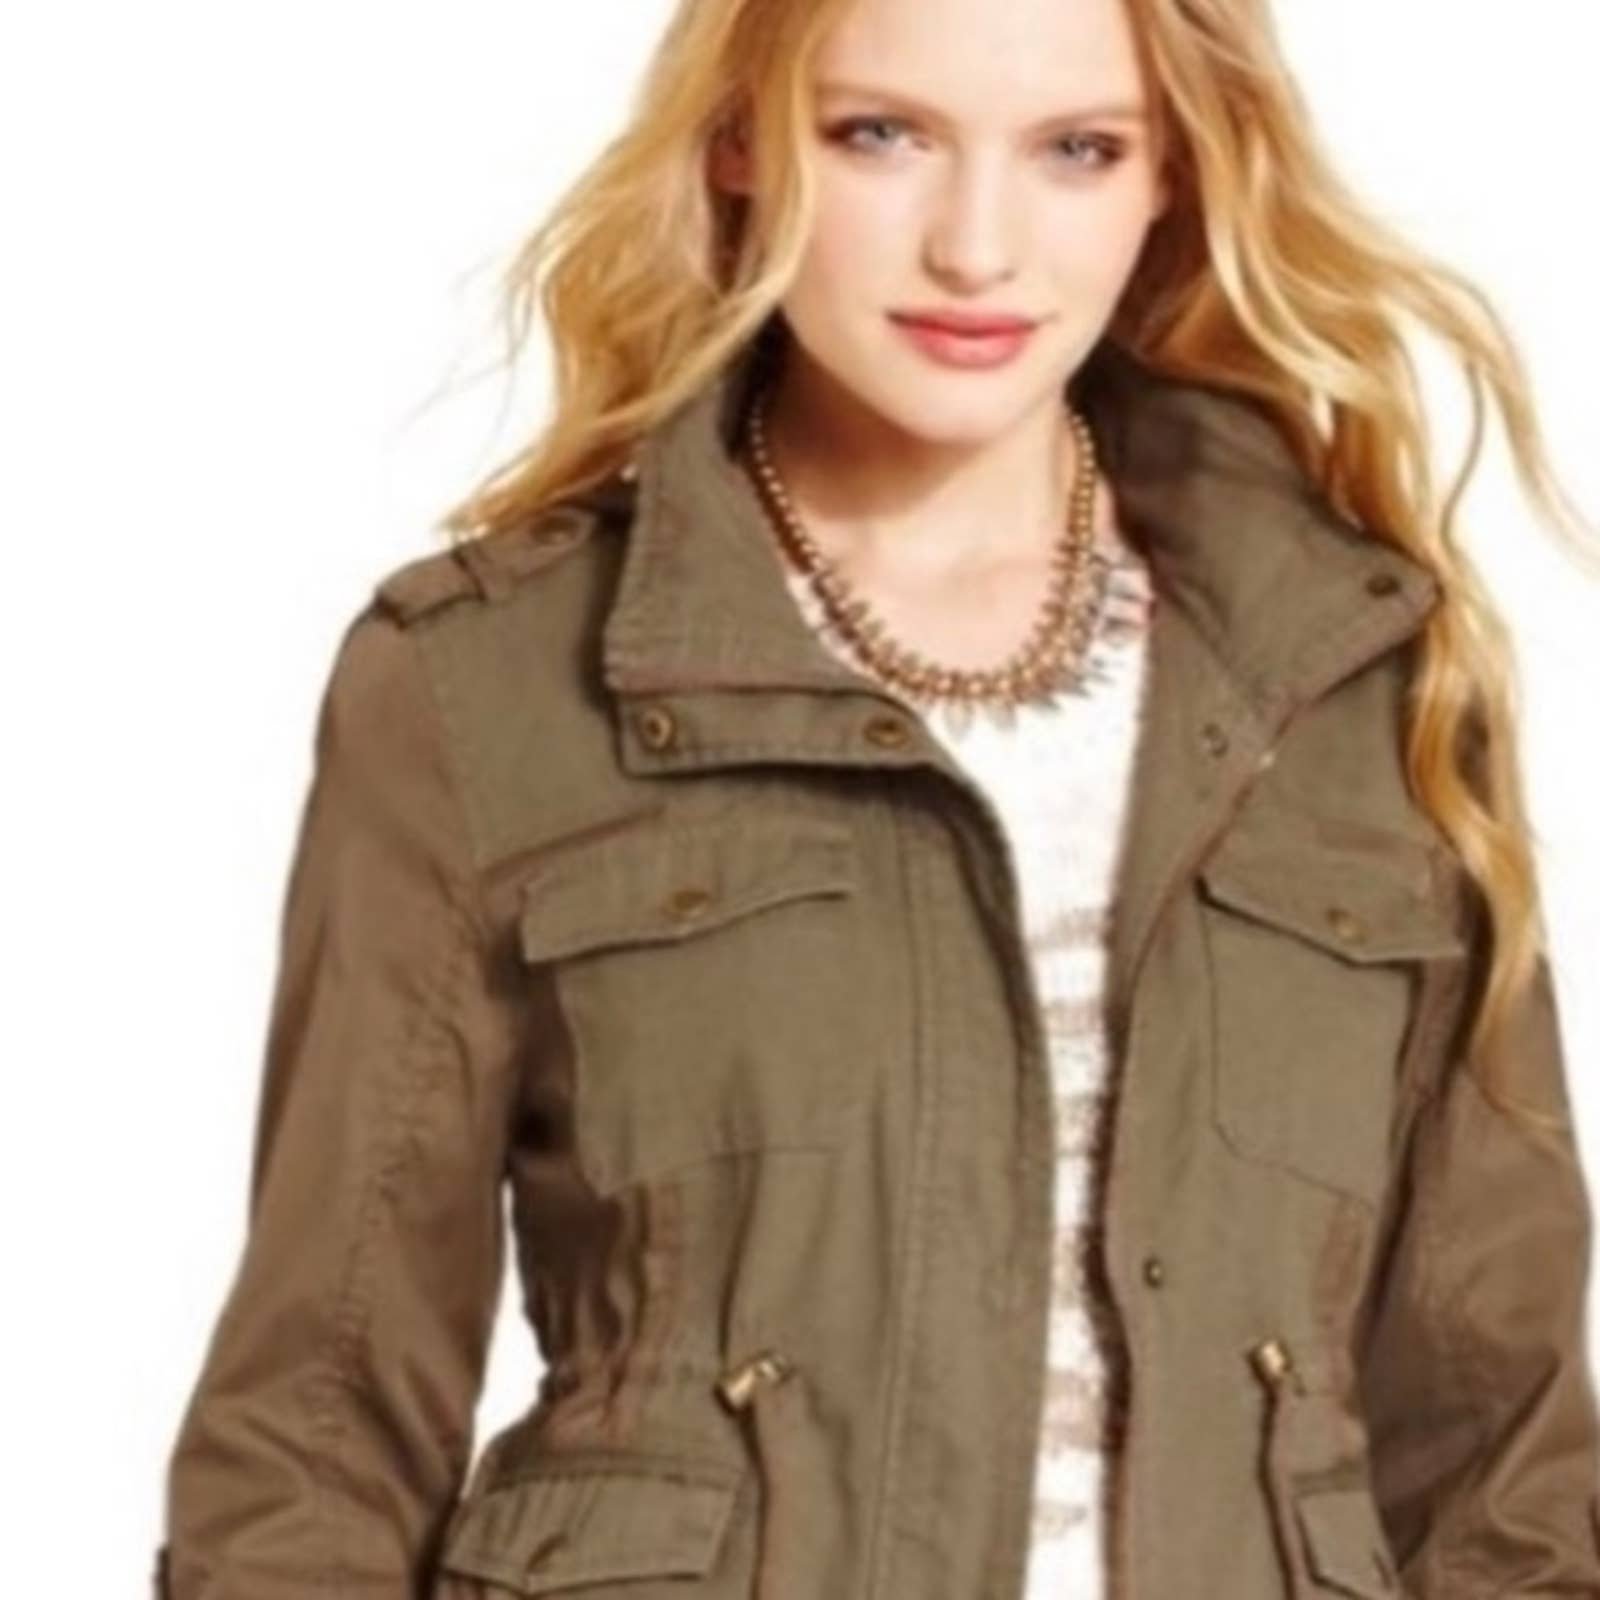 Wholesale price EUC American Rag Military Style Olive Green Jacket JvD2EPlma Online Shop